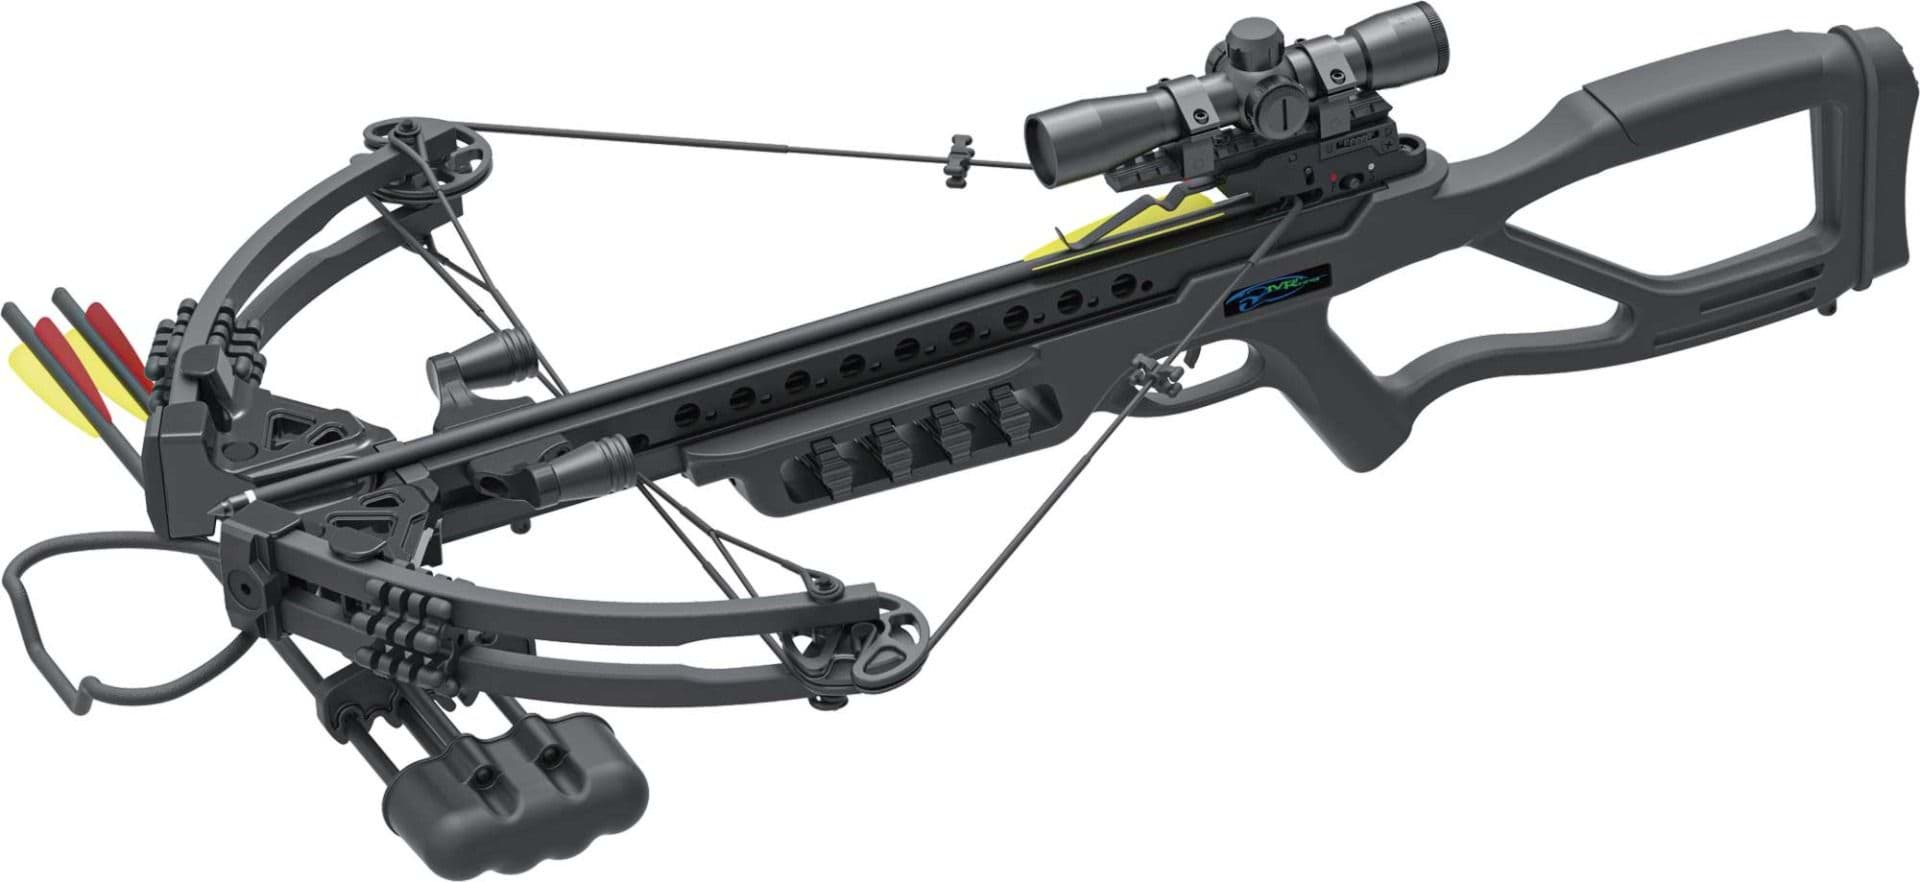 Picture of Man Kung - Fighter 185 lbs Black Compound Crossbow